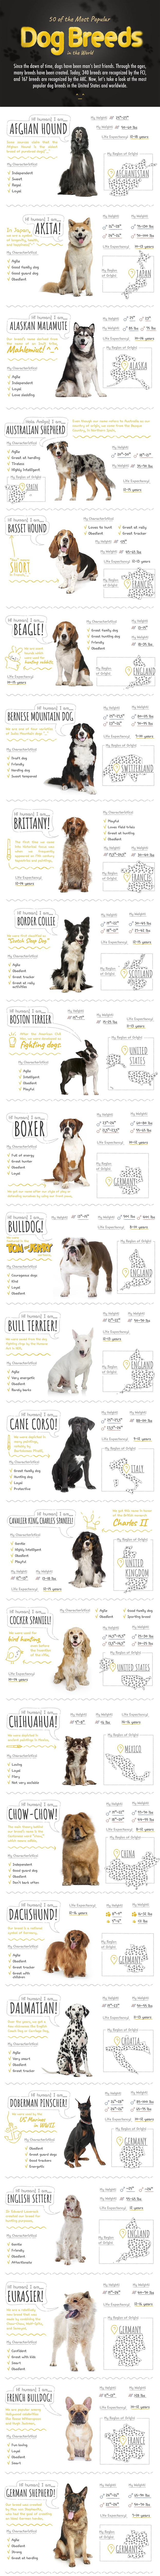 50 of the Most Popular Dog Breeds in the World